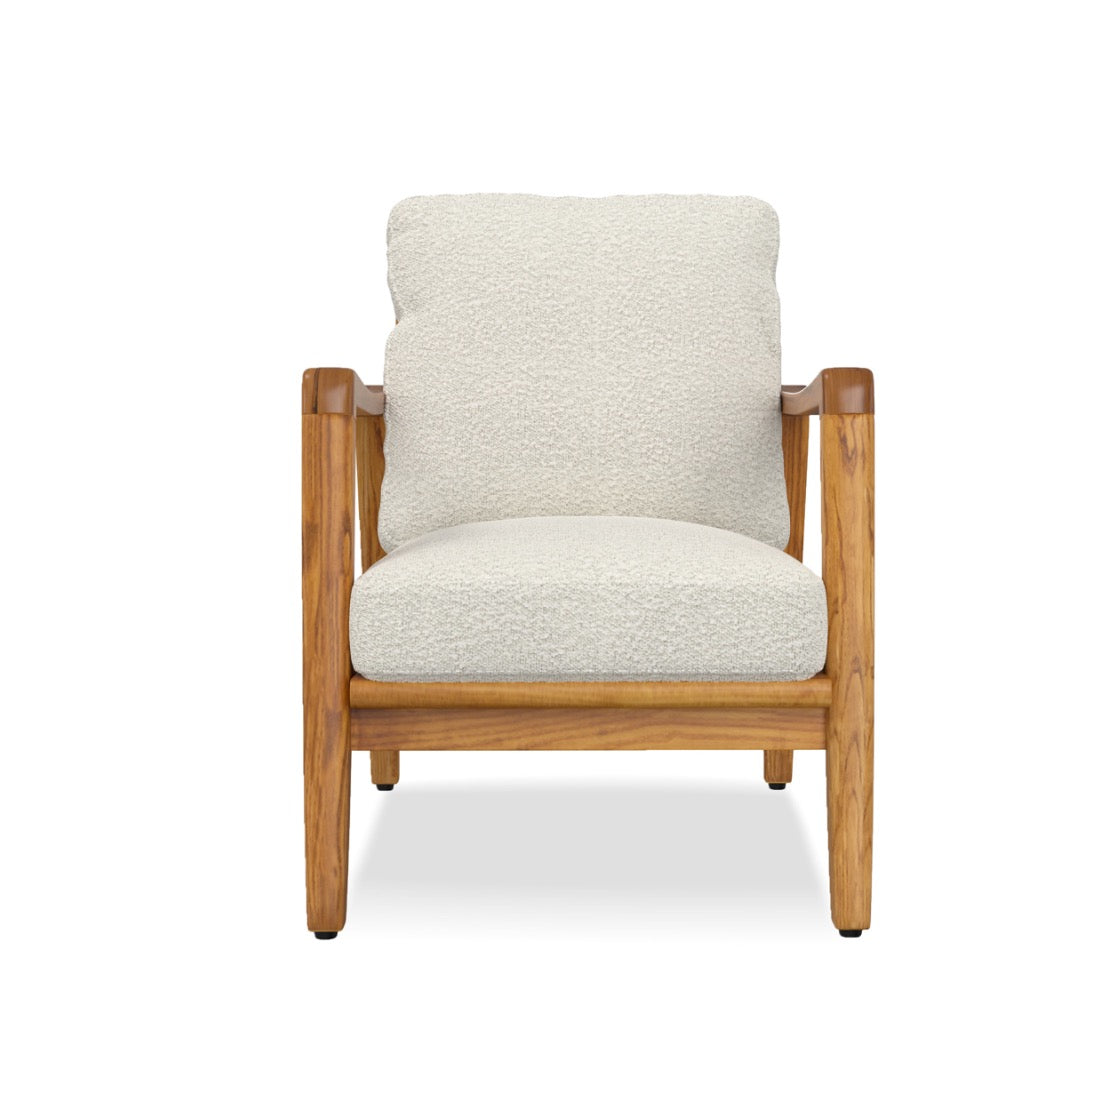 Craftsman Occasional Chair